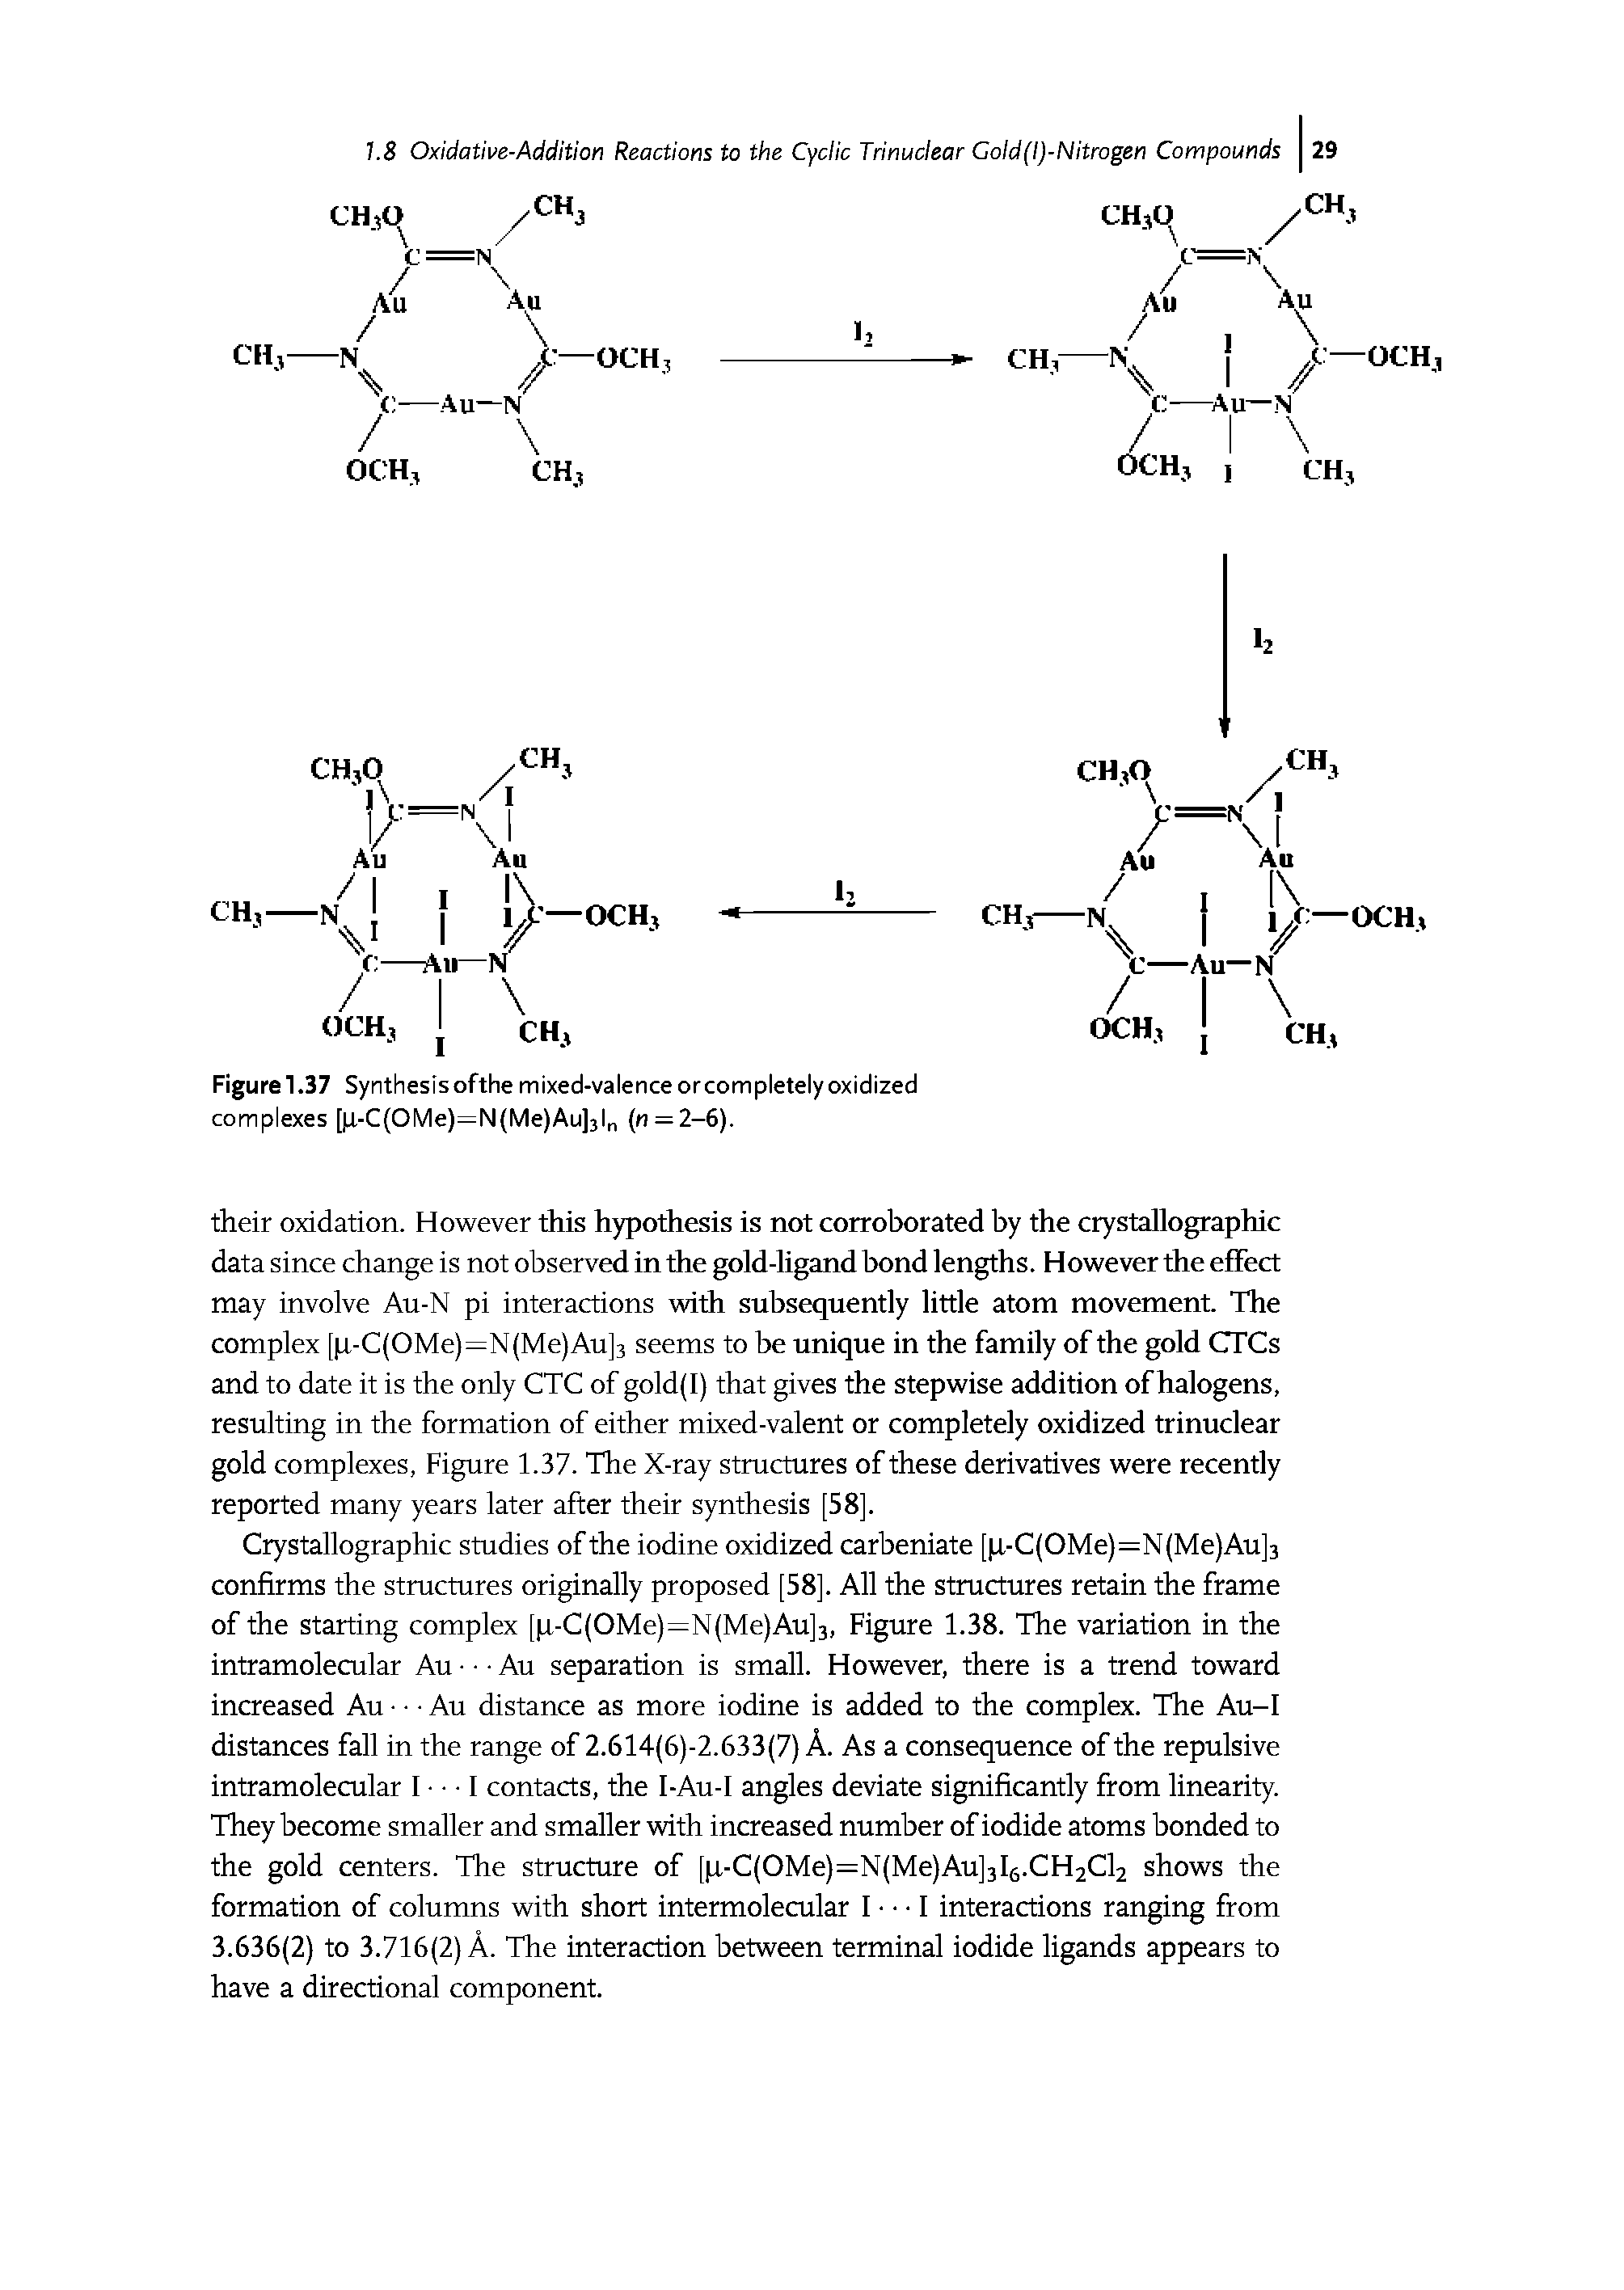 Figure 1.37 Synthesis ofthe mixed-valence or completely oxidized complexes [p-C(OMe)=N(Me)Au]3l (n = 2-6).